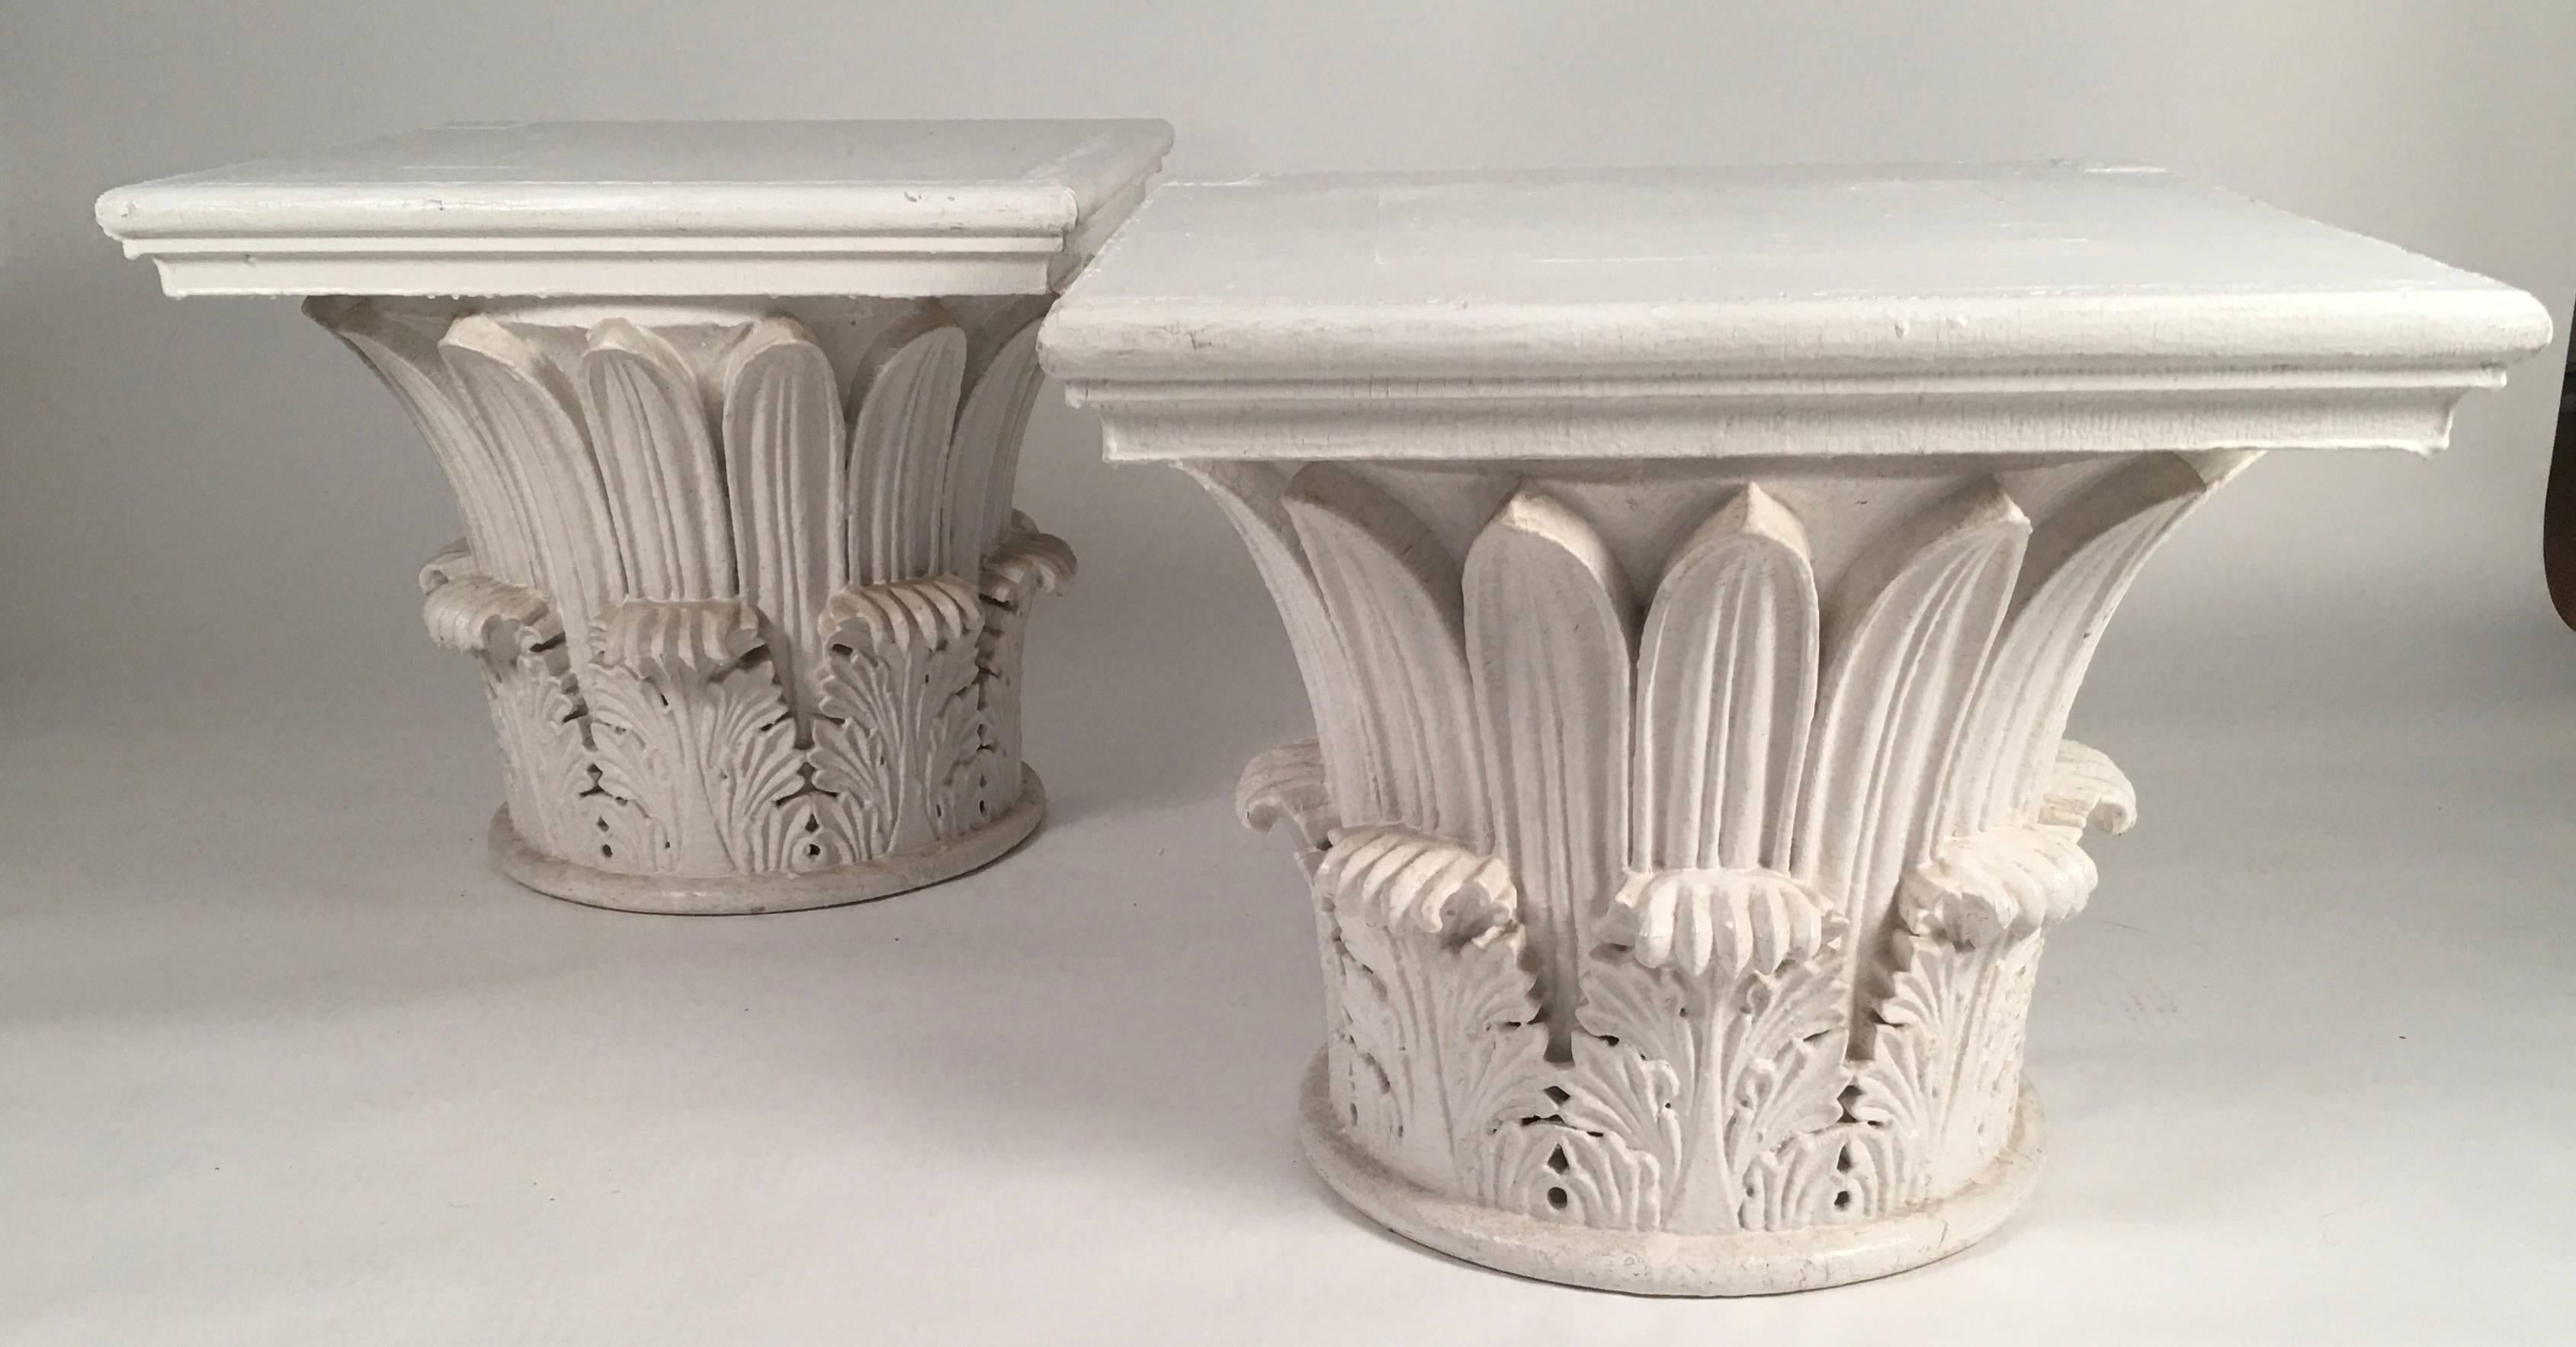 A pair of large 19th century neoclassical carved wood and white painted column capitals in the Corinthian Tower of the Winds order, featuring a single row of palm leaves above a row of acanthus leaves. These architectural elements would make